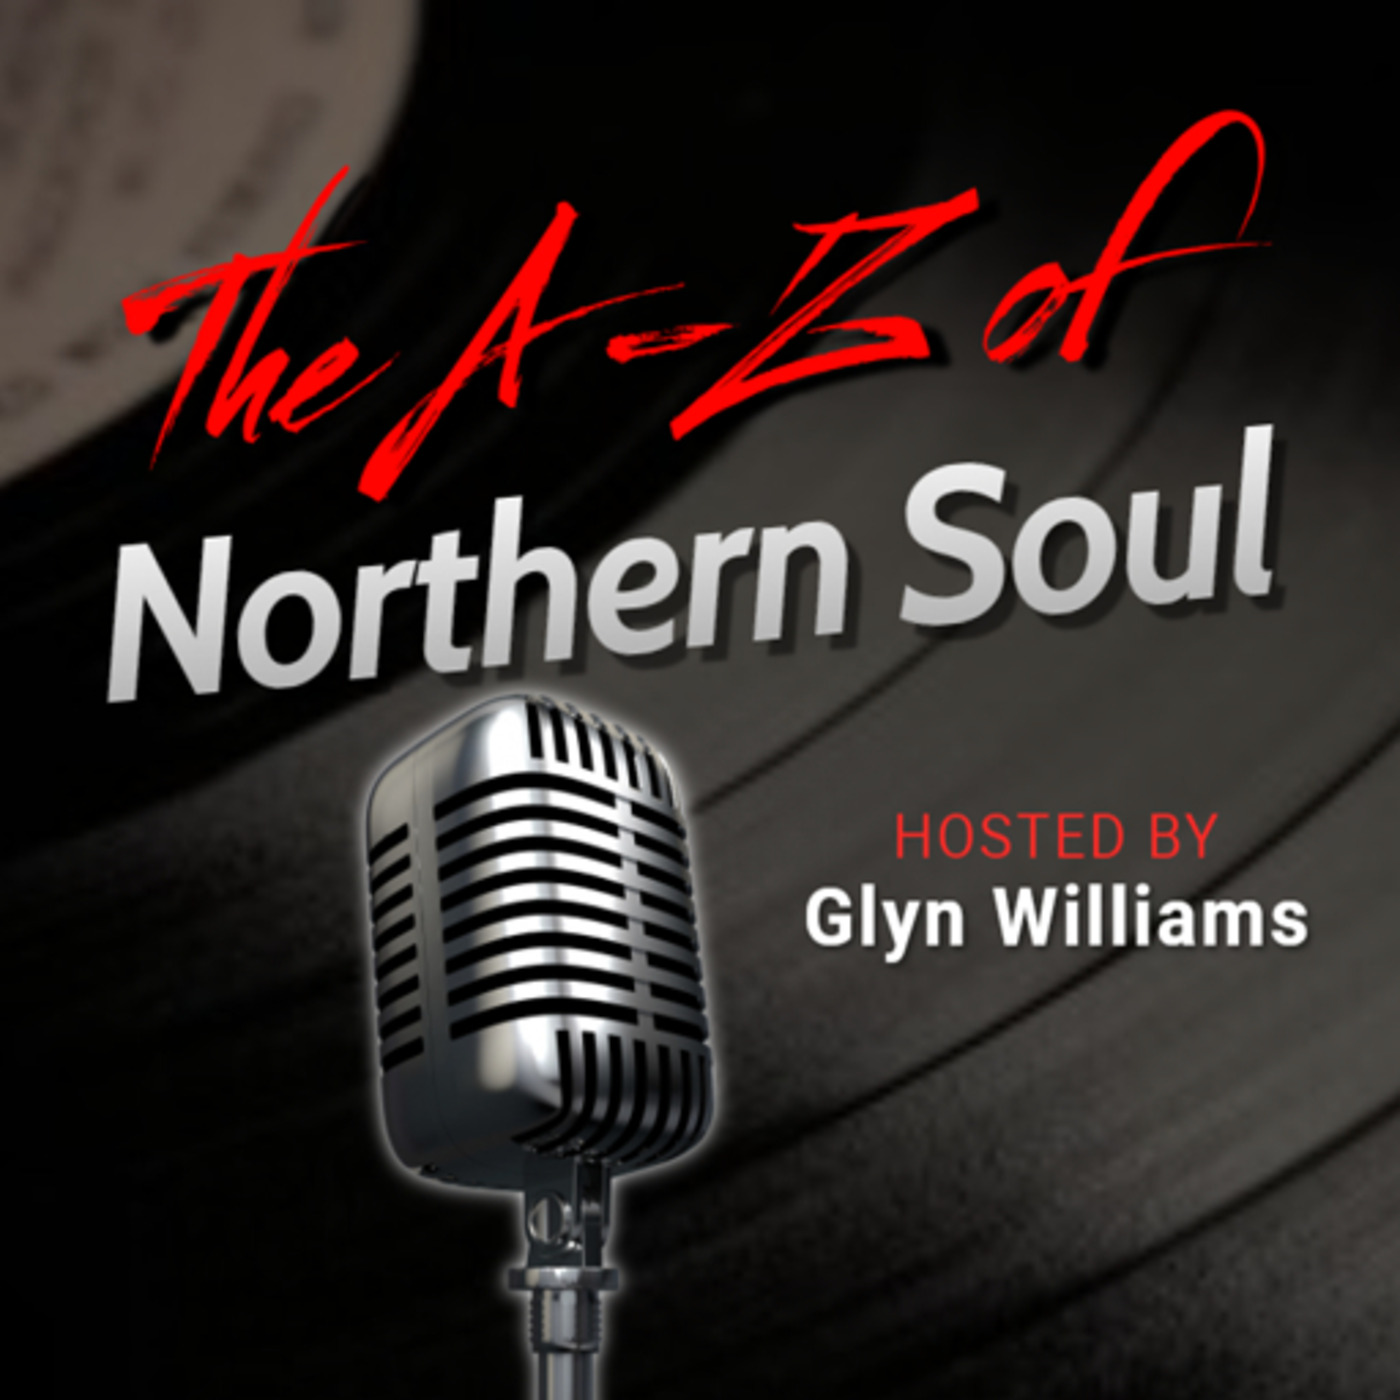 The A-Z of Northern Soul E060